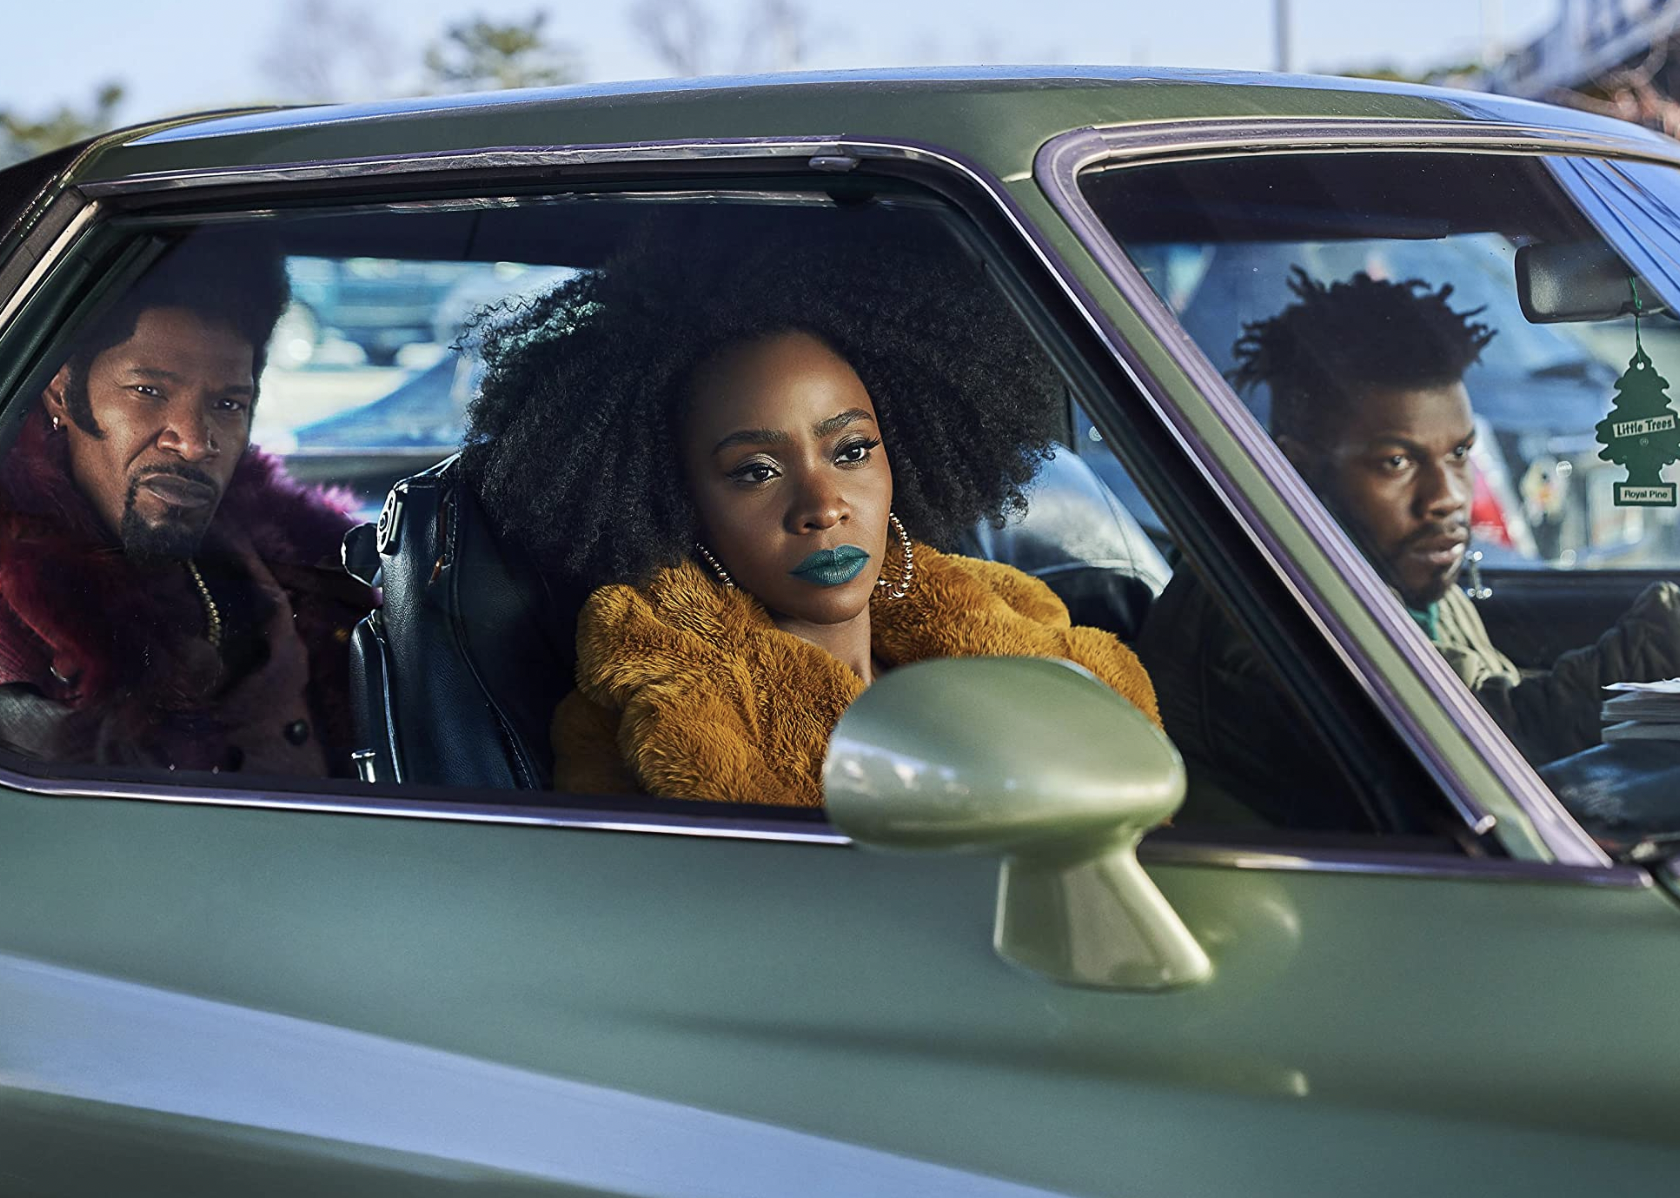 Jamie Foxx, Teyonah Parris, and John Boyega in "They Cloned Tyrone".